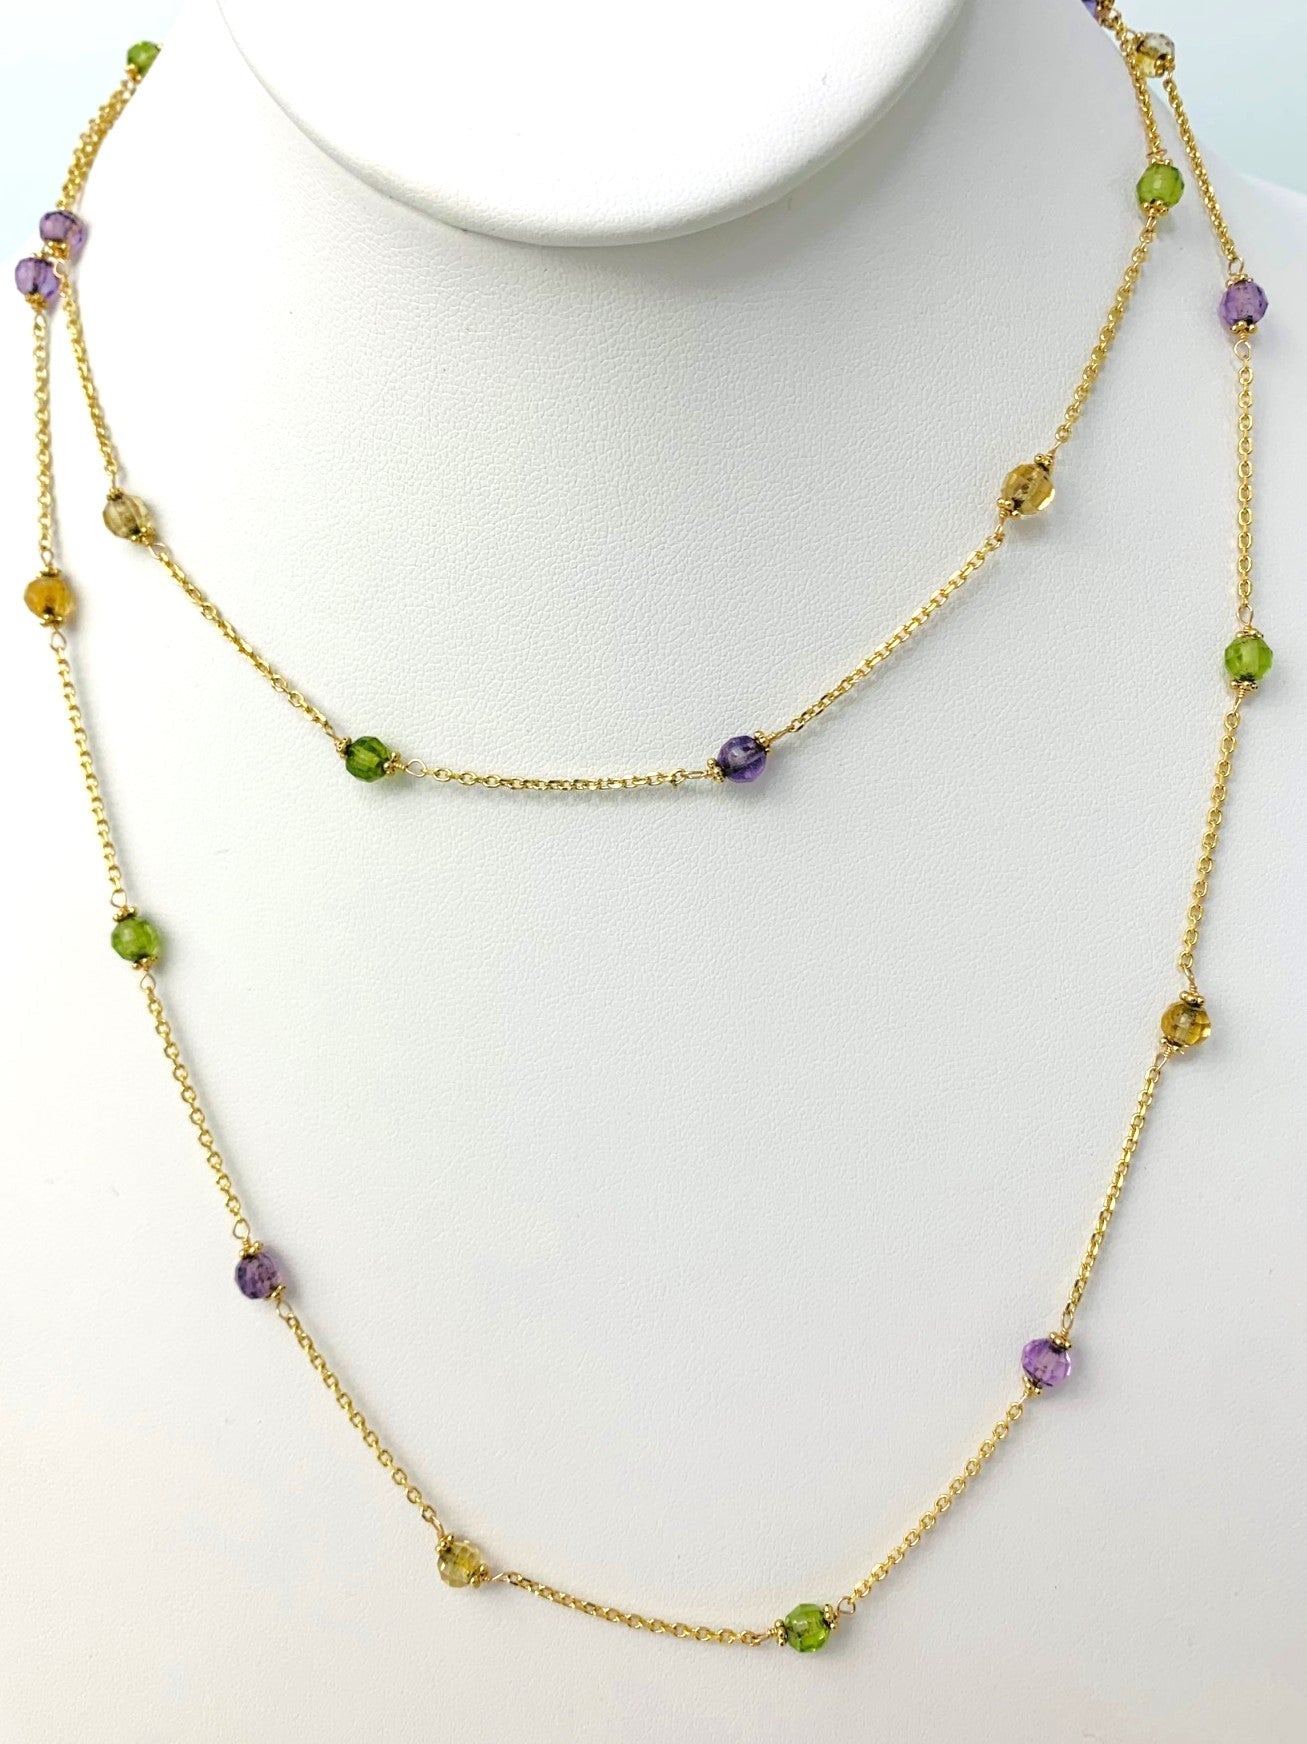 36" Citrine, Peridot, And Amethyst Station Necklace in 14KY - NCK-239-TNCGM14Y-MLTI-36